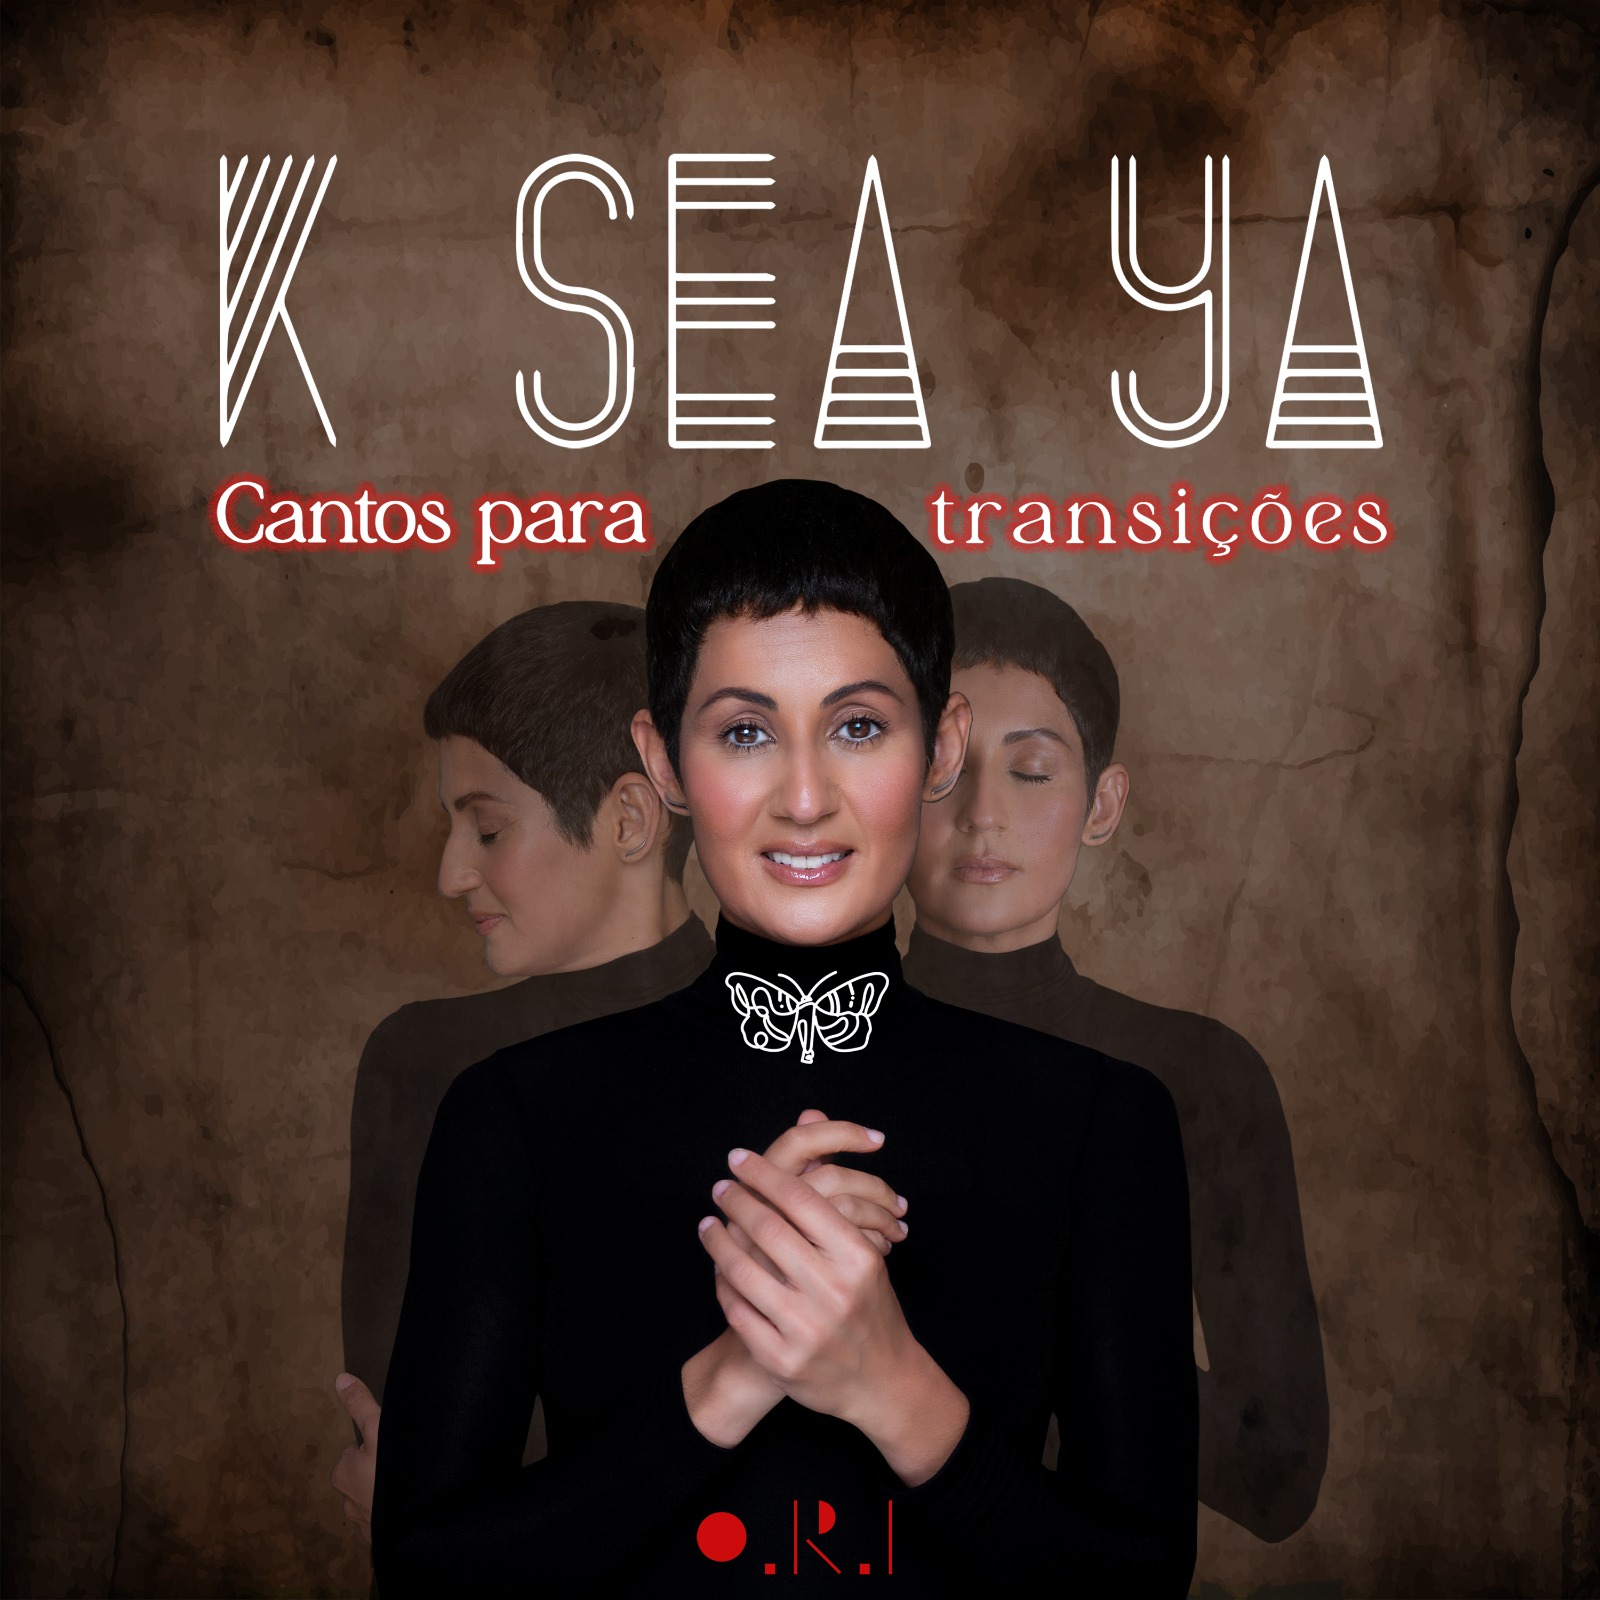 K Sea Ya released the first single “Crisálida” on an album dedicated to transforming consciousness